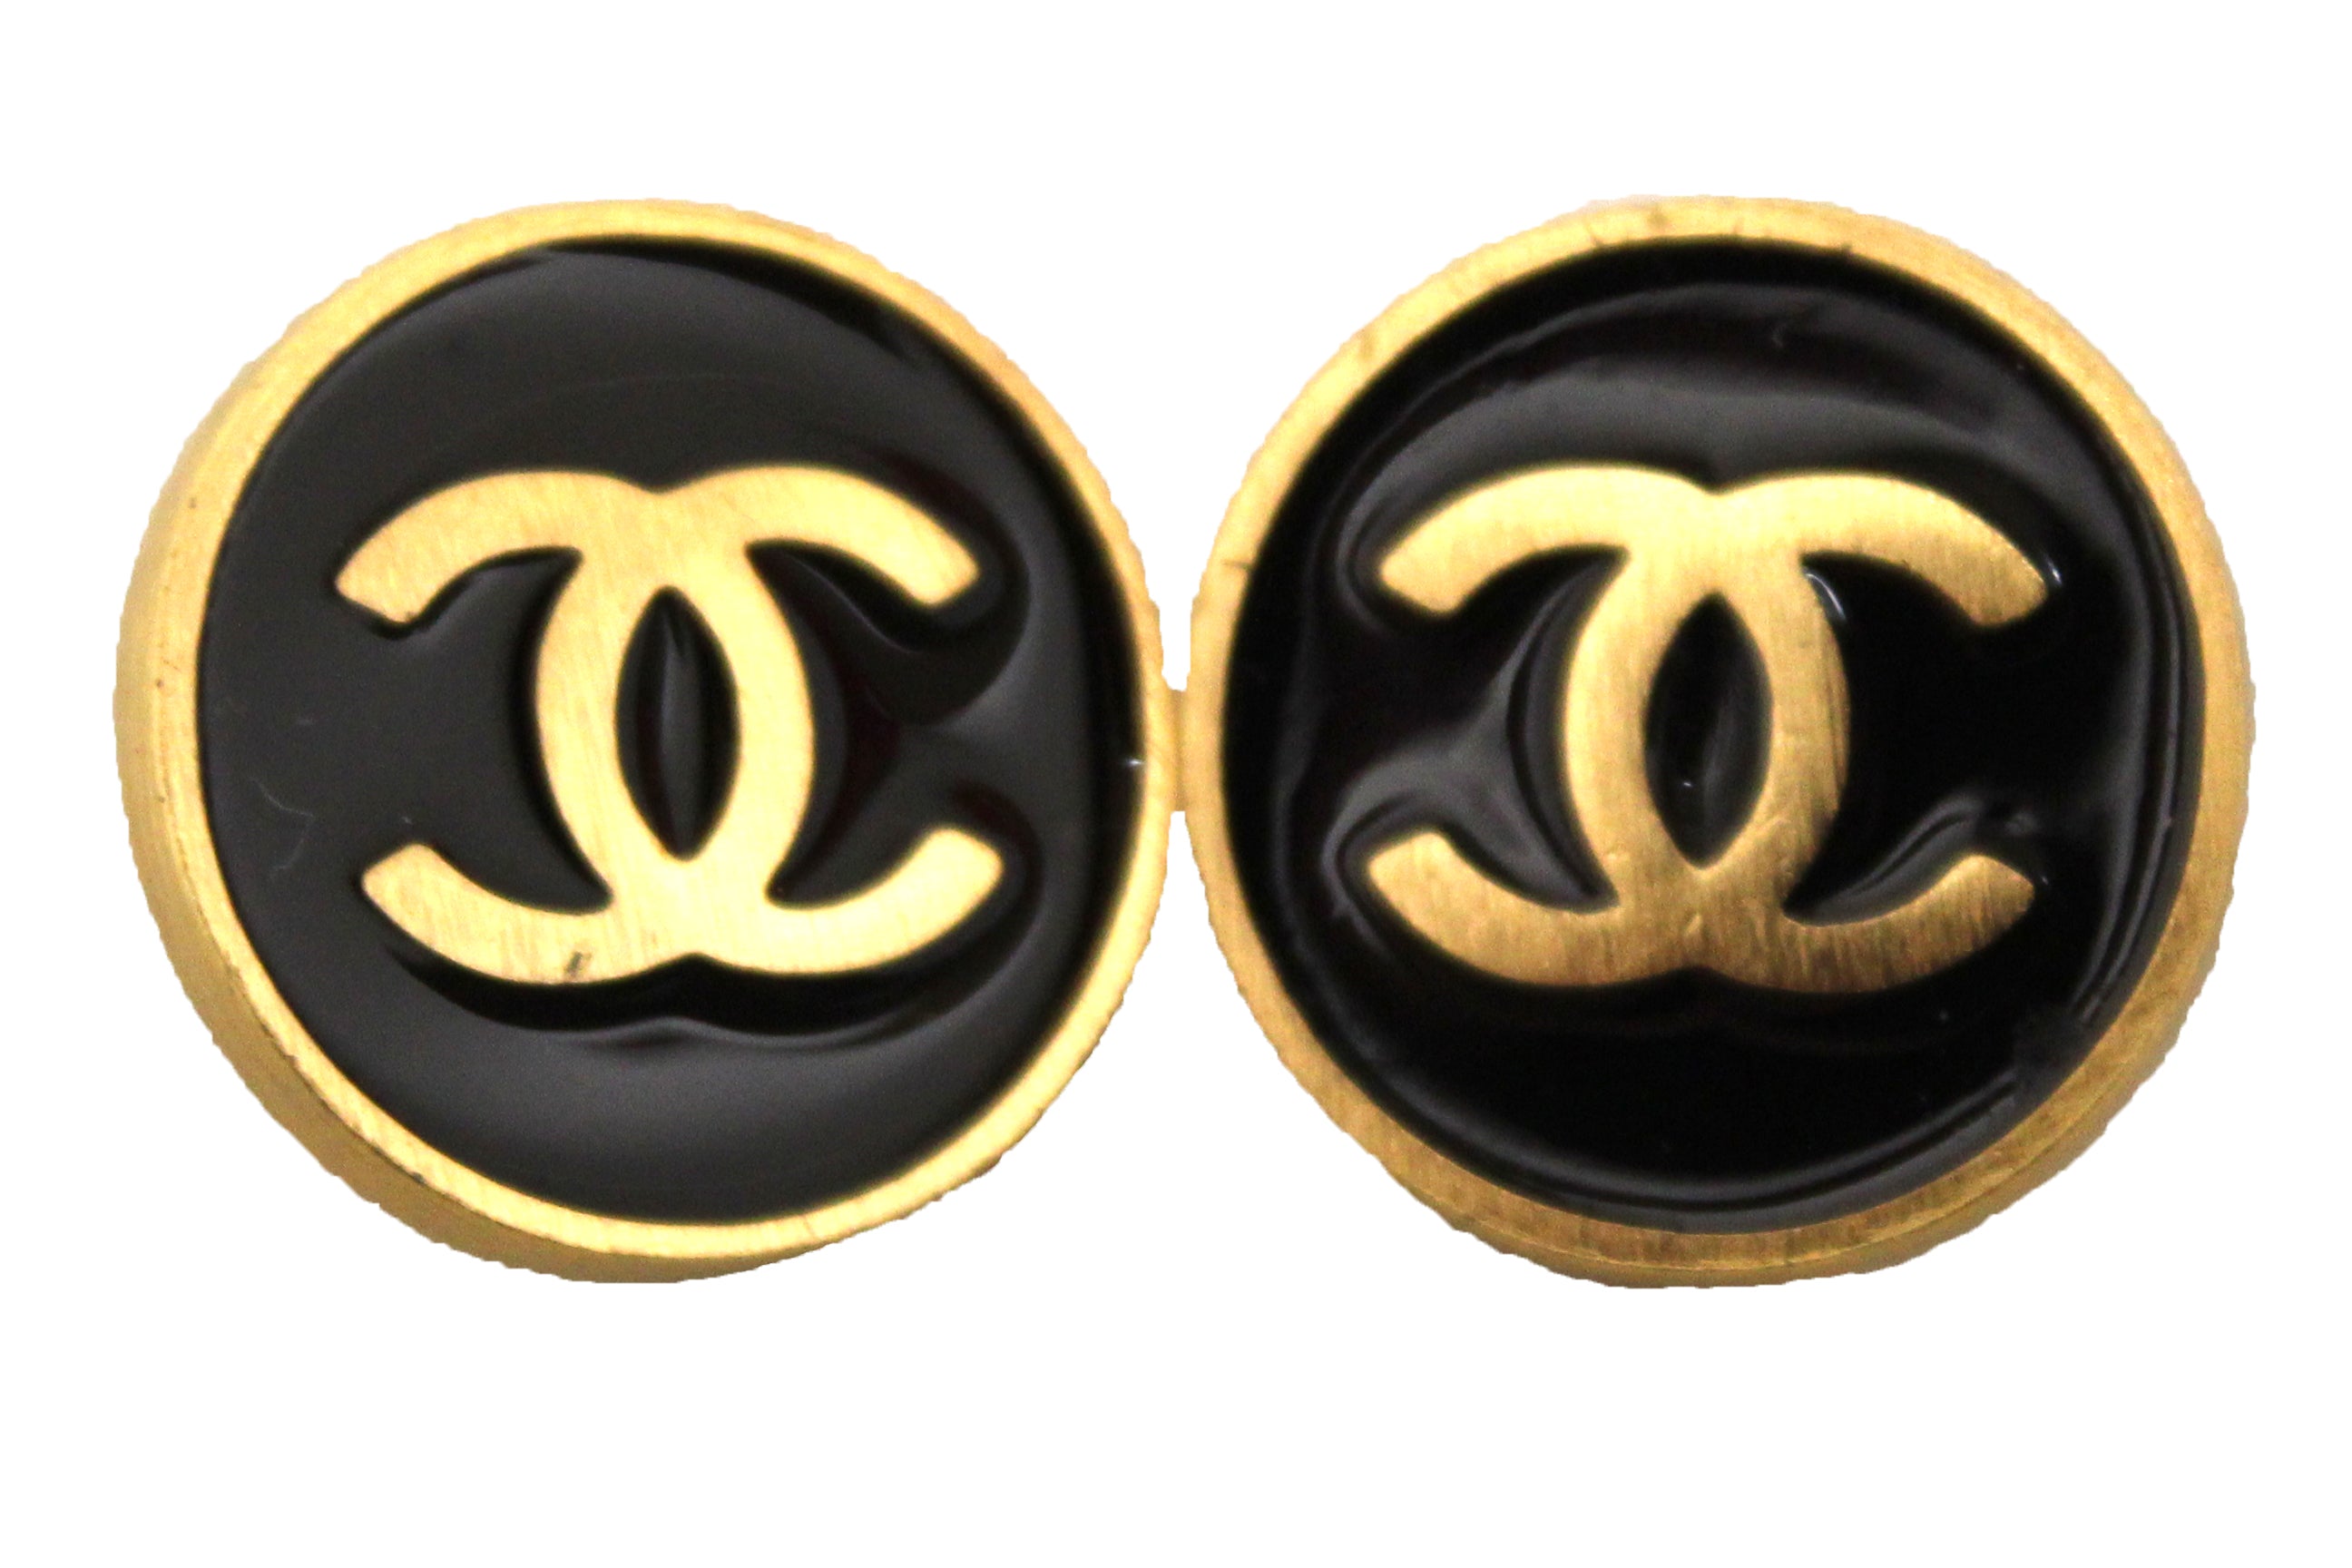 Vintage Chanel Black and Gold Round Earrings with CC Logo